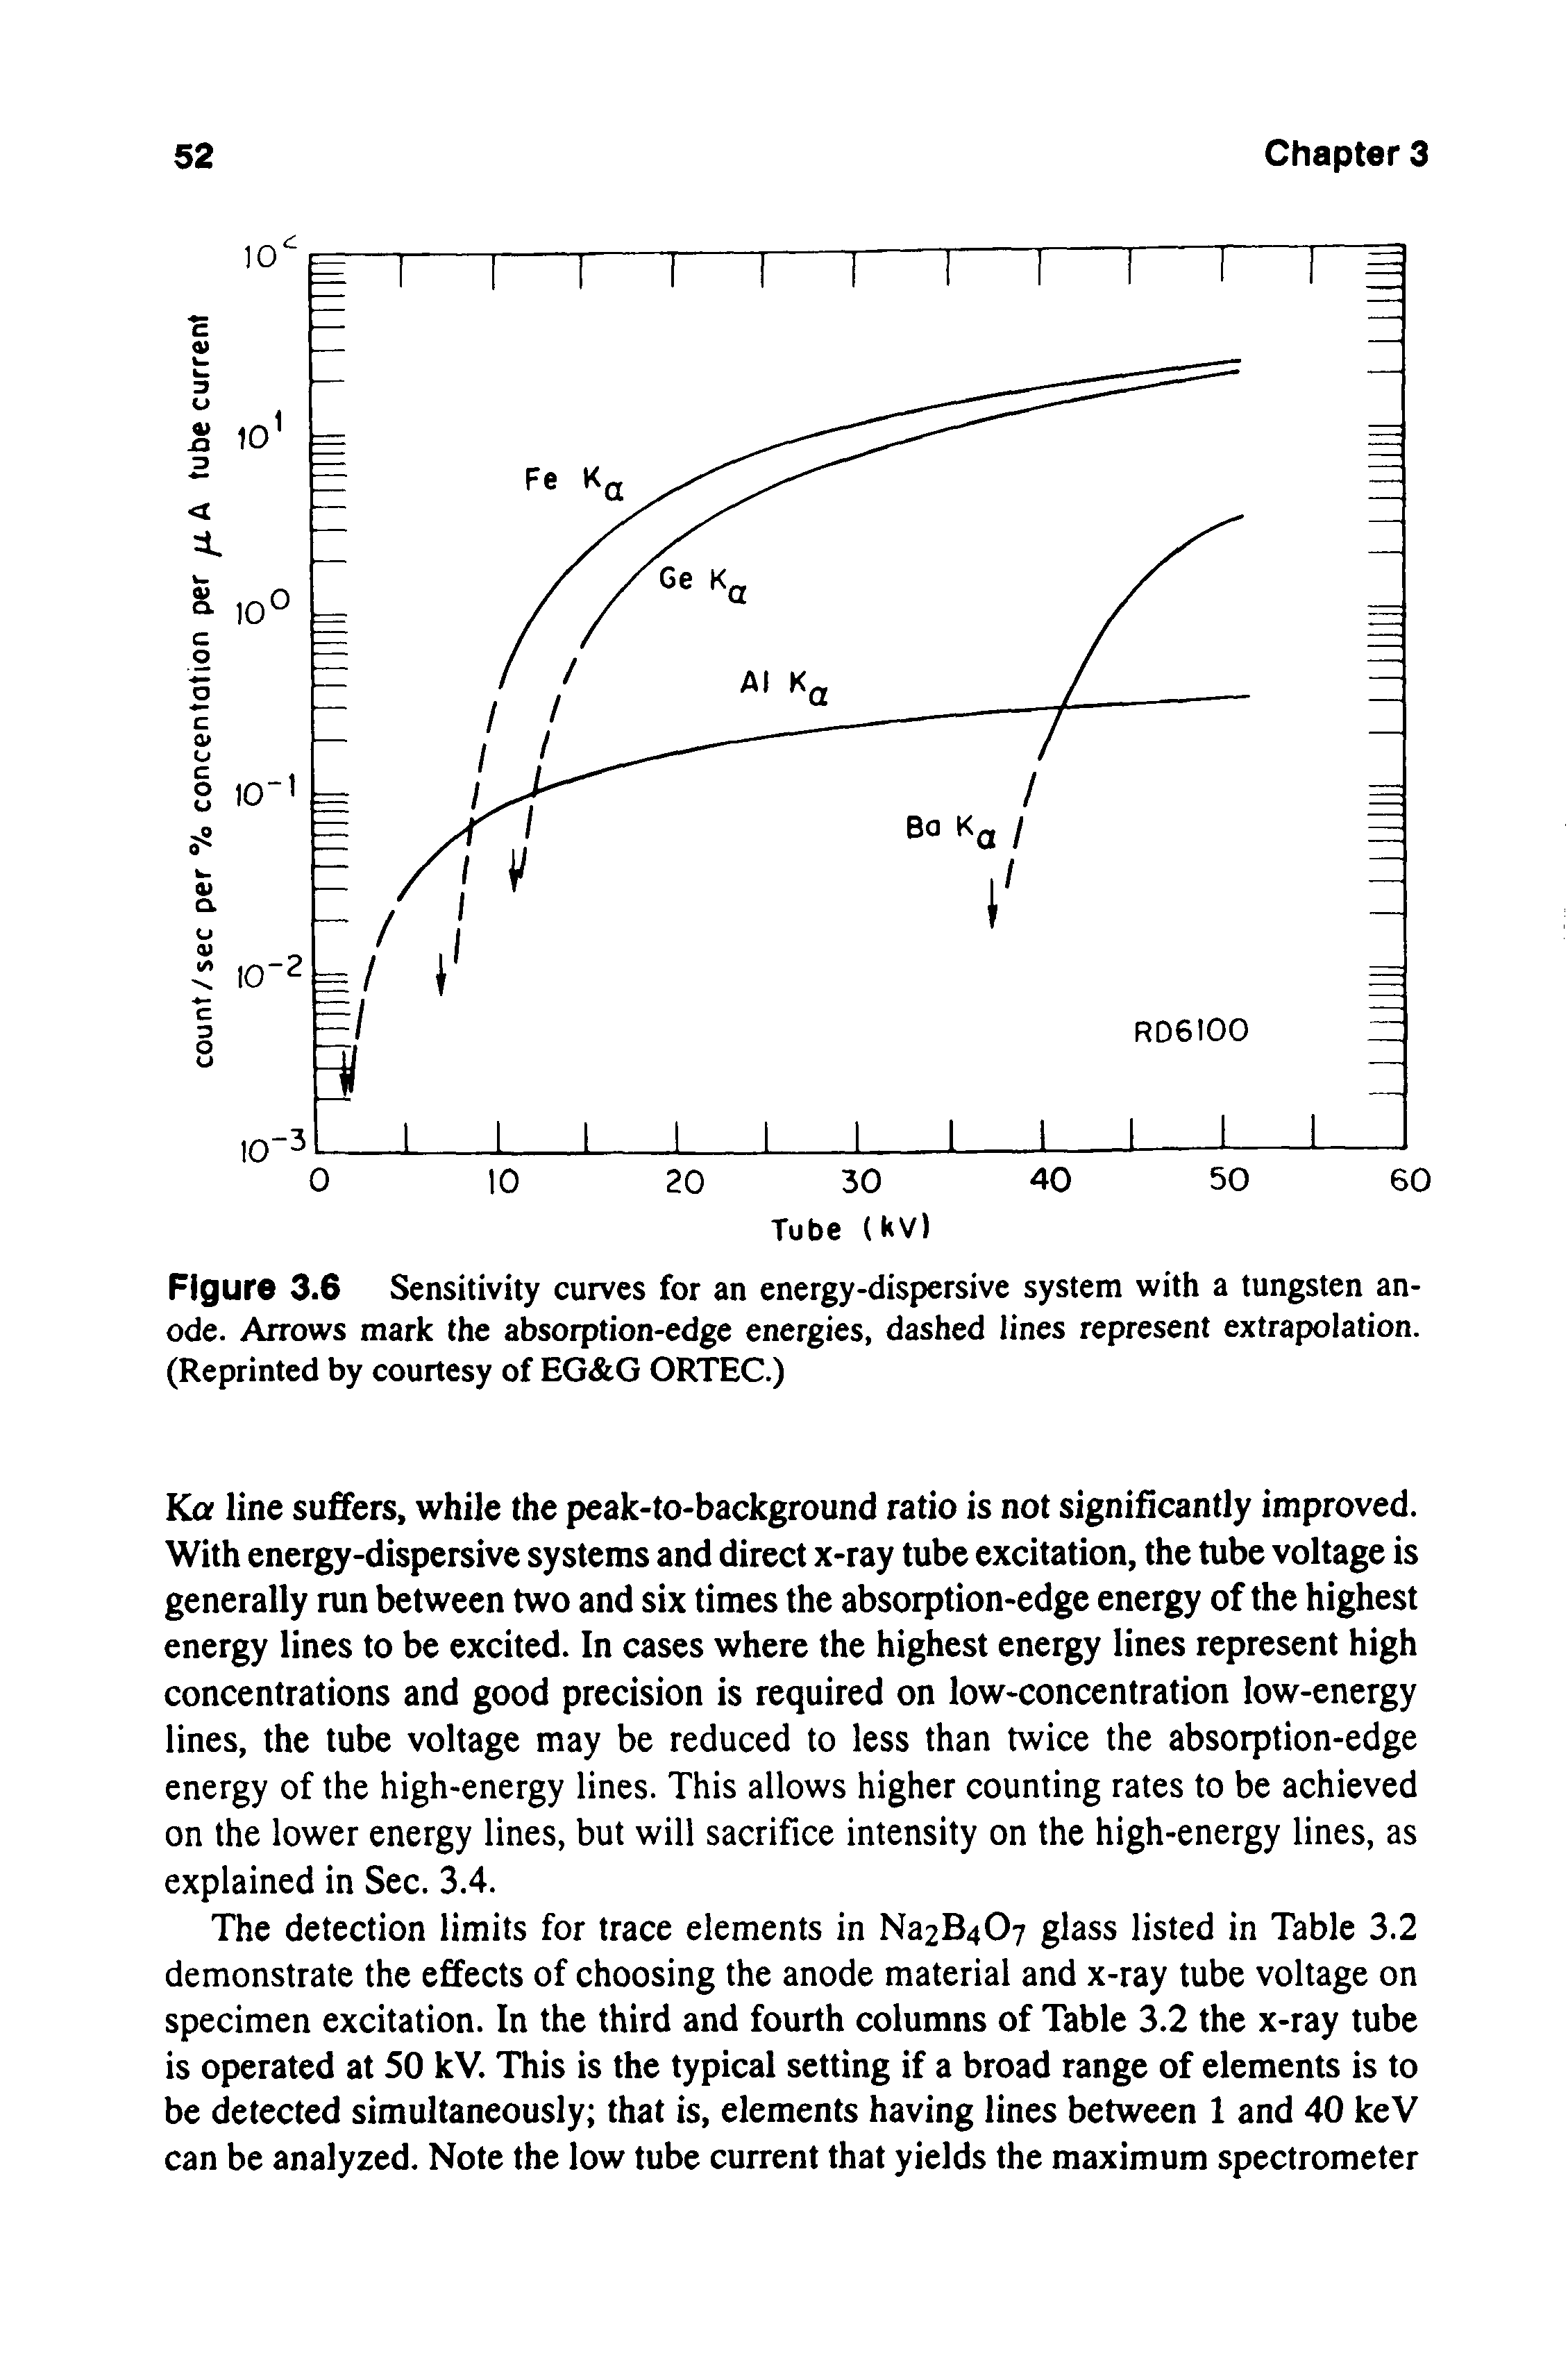 Figure 3.6 Sensitivity curves for an energy-dispersive system with a tungsten anode. Arrows mark the absorption-edge energies, dashed lines represent extrapolation. (Reprinted by courtesy of EG G ORTEC.)...